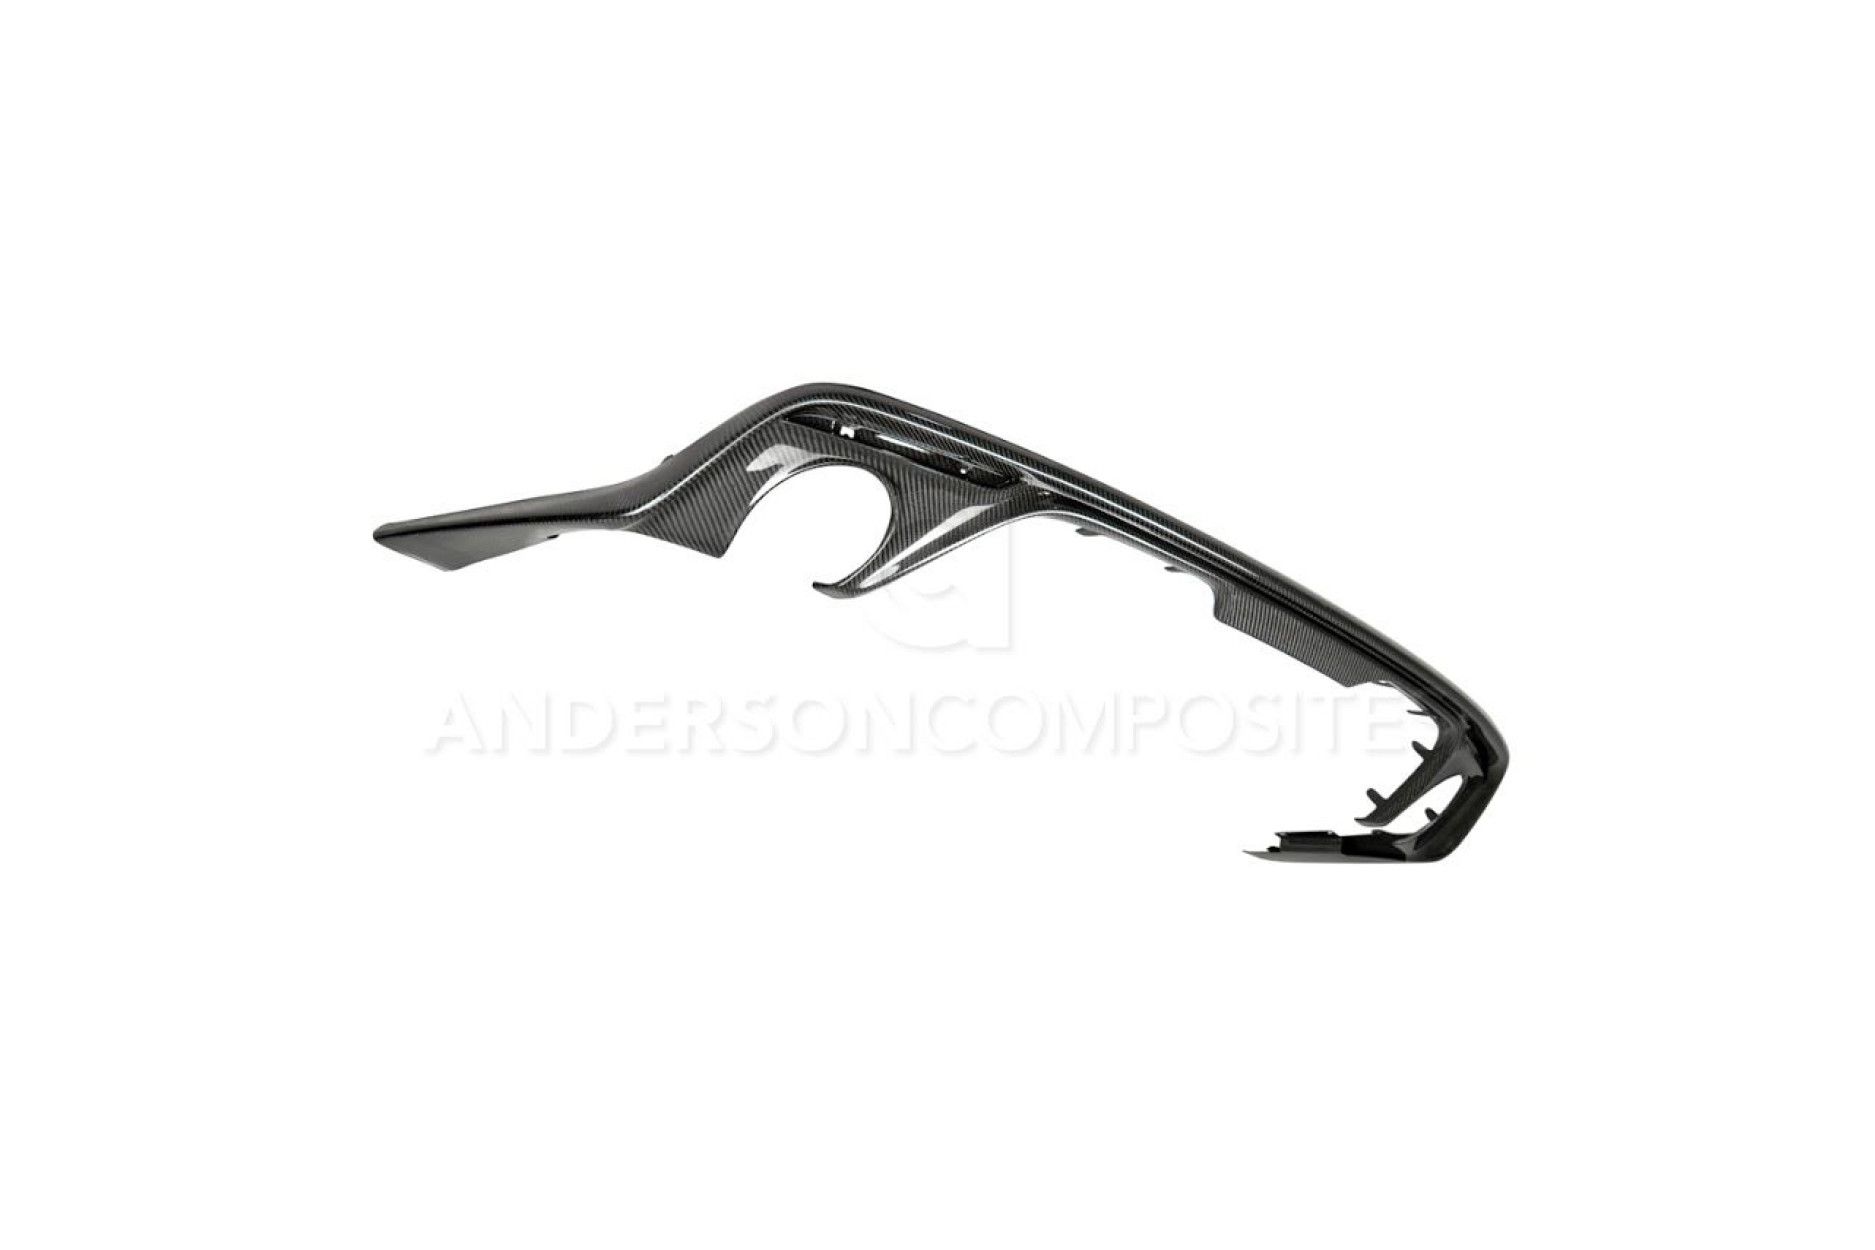 Anderson Composites Type-OE carbon fiber rear valance for 2015-2017 Ford Mustang